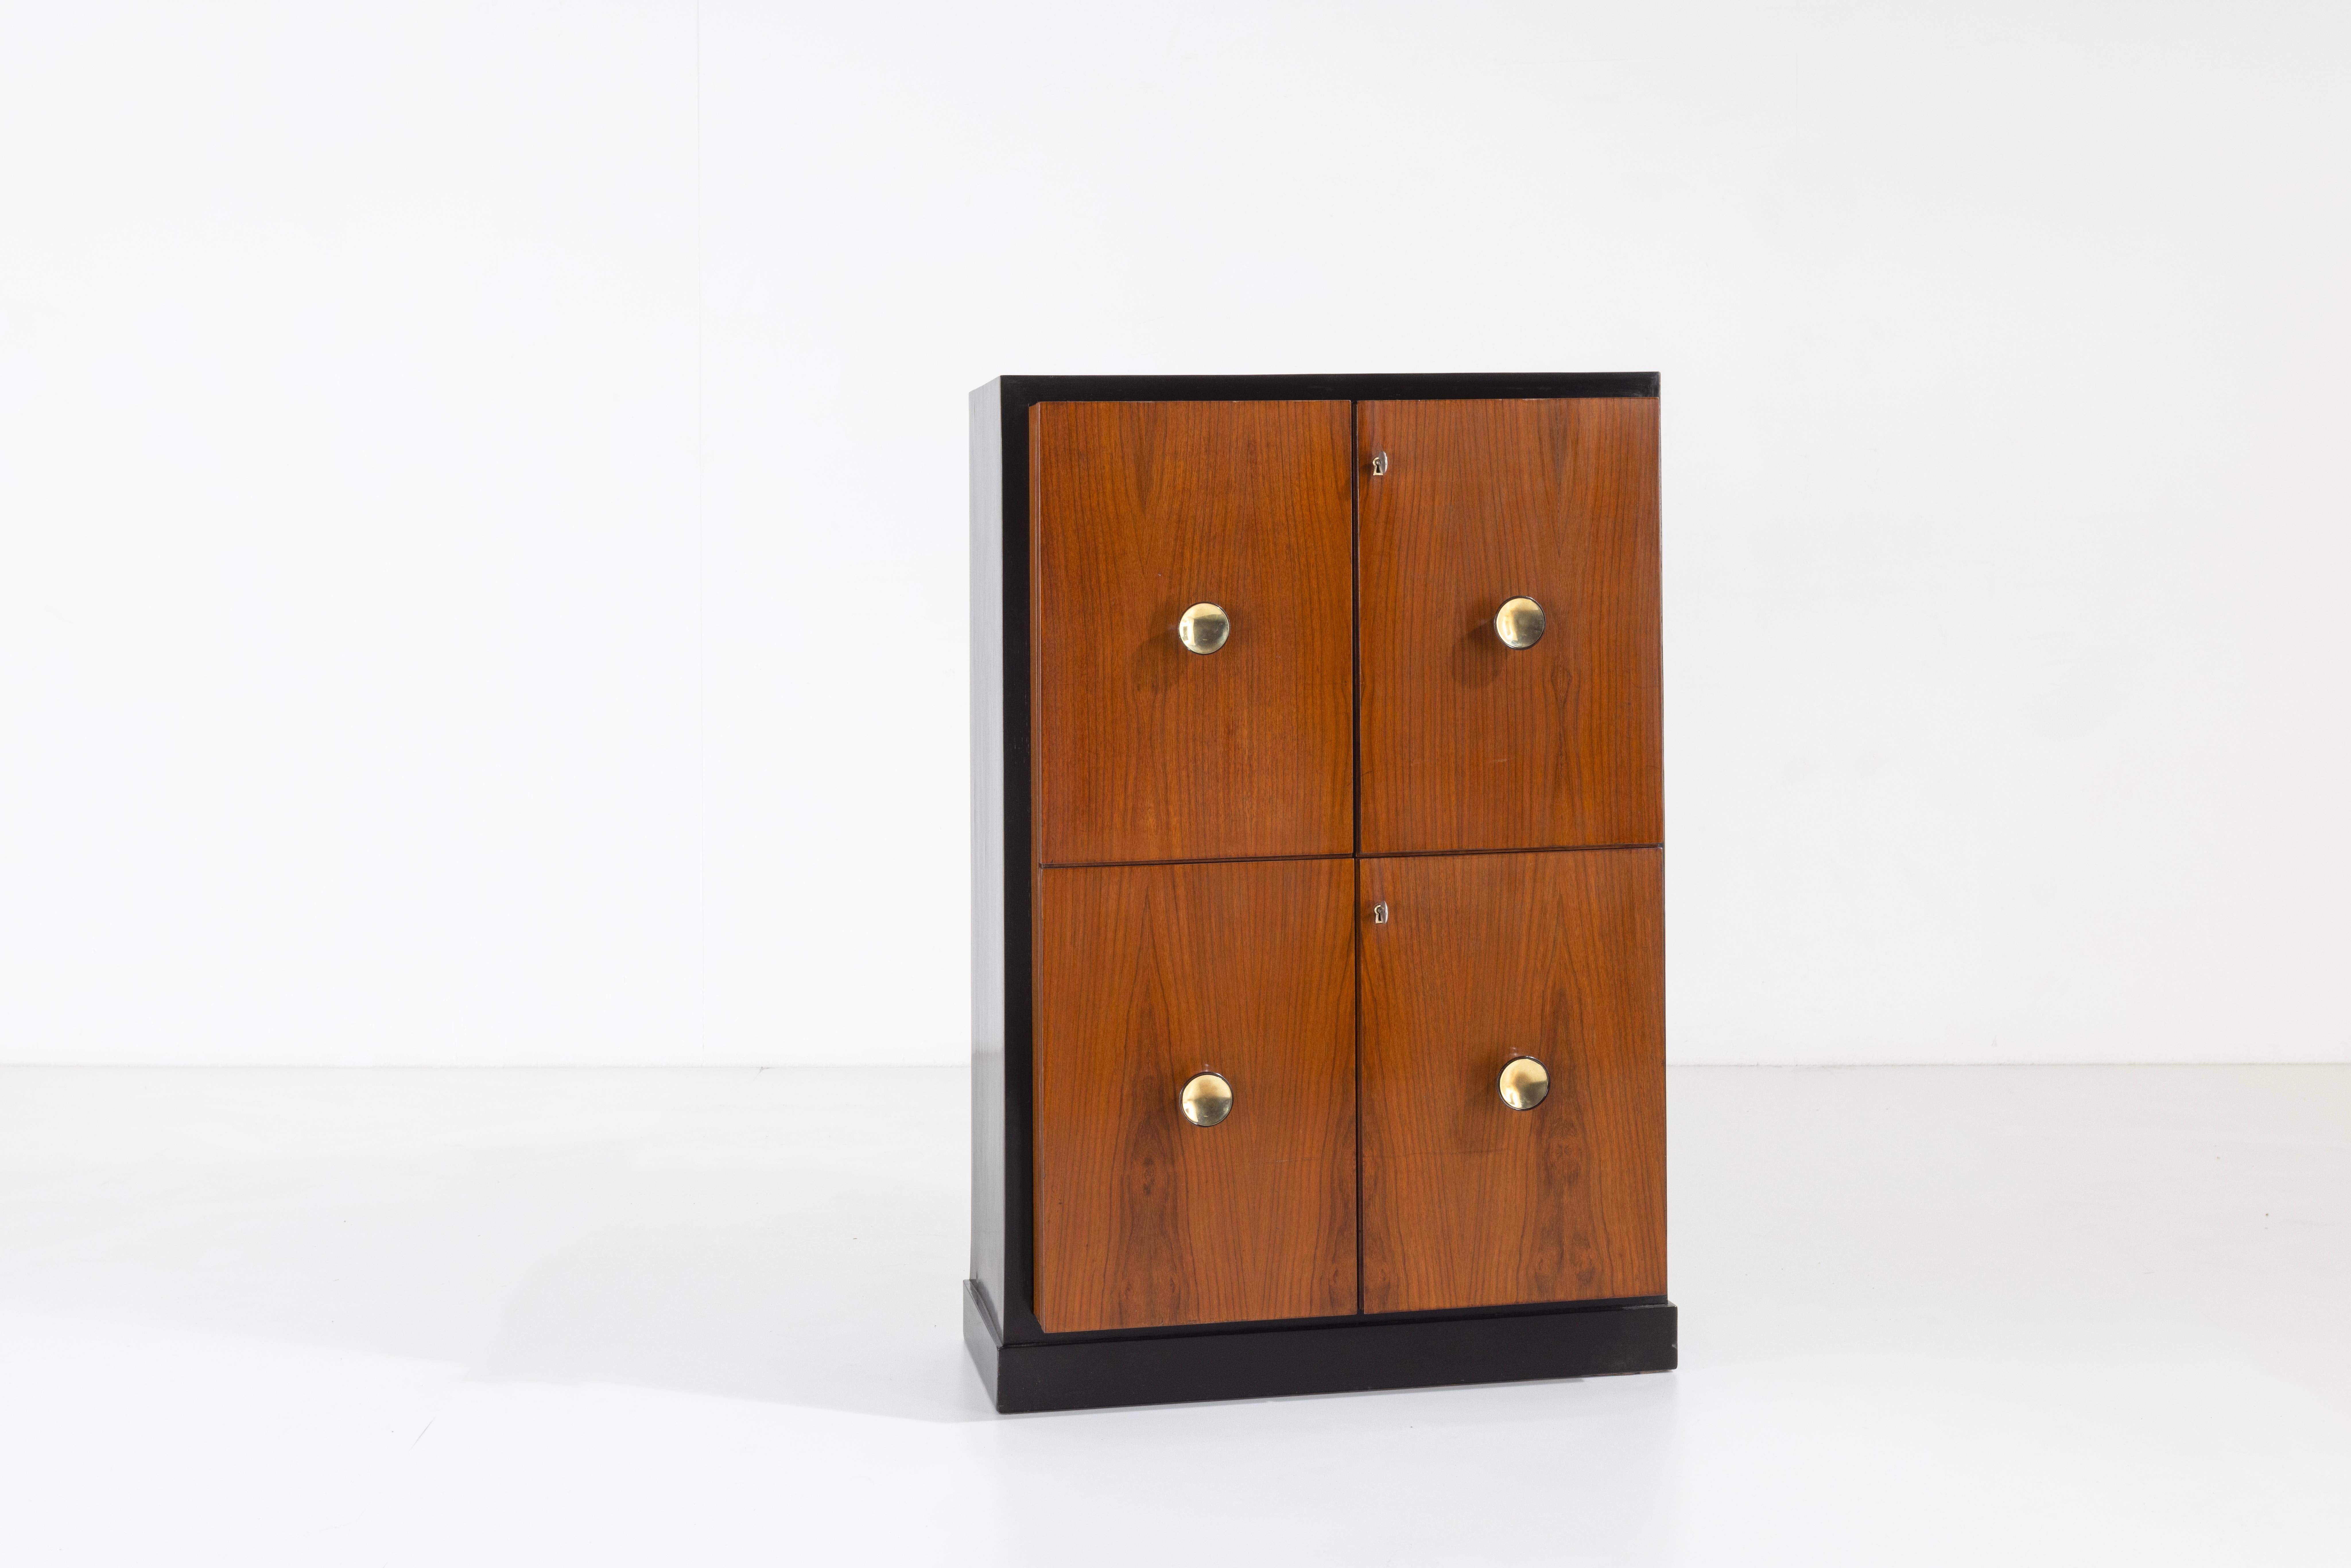 This unique piece of furniture is an elegant storage unit that fits perfectly in both the living room and bedroom. The main structure in ebonized wood contrasts with the natural wood of the doors, which are enhanced by turned brass handles to act as